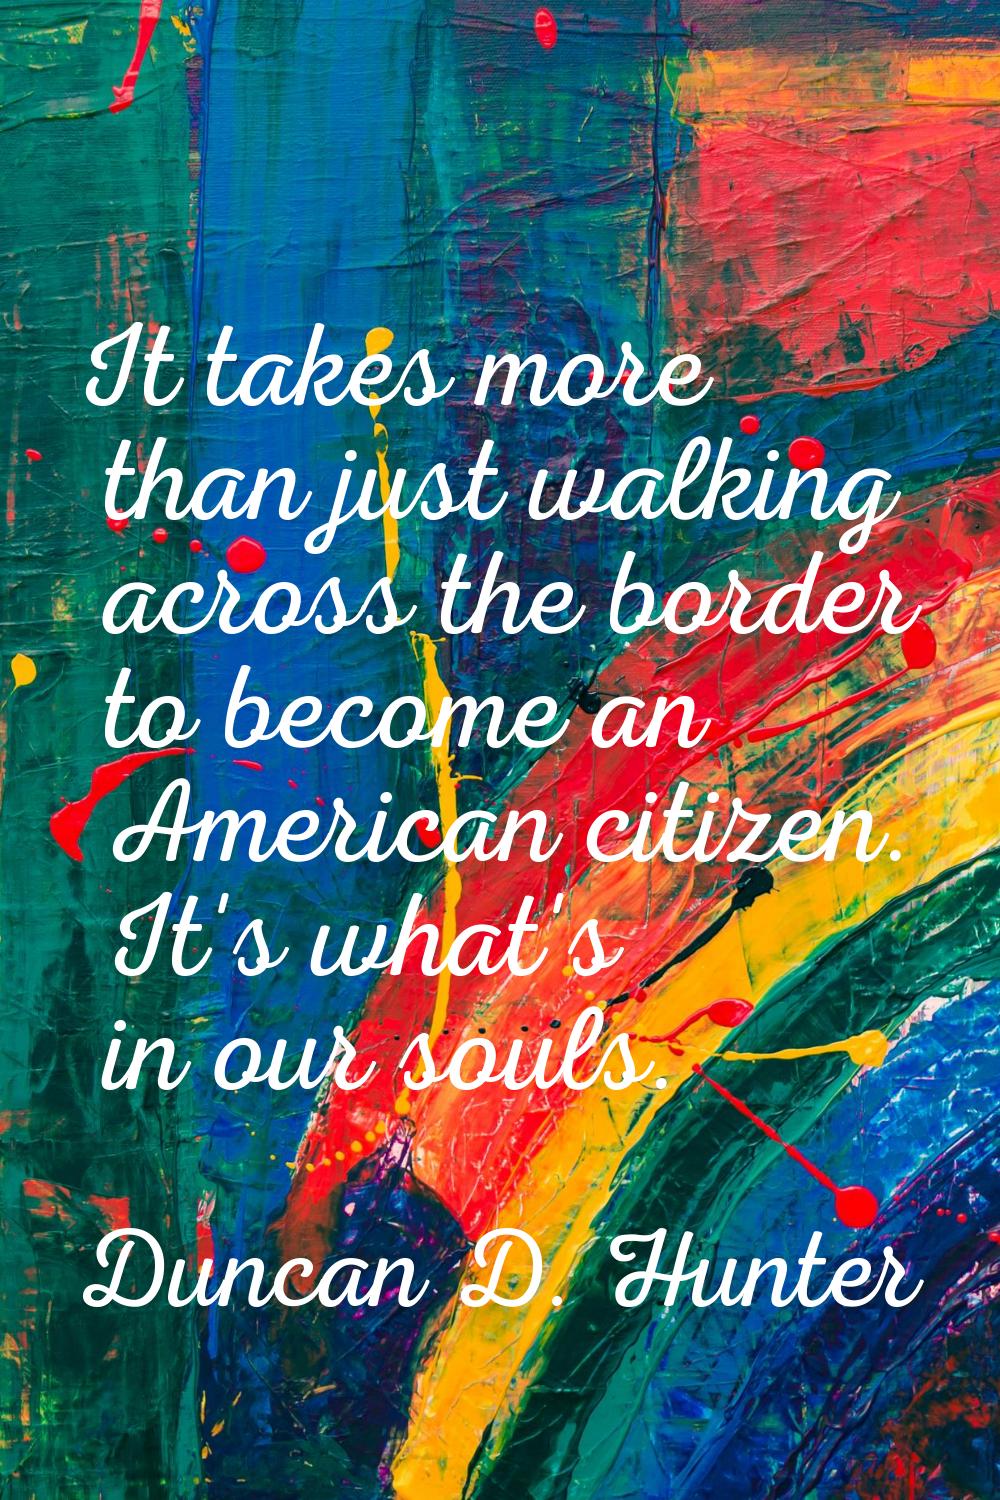 It takes more than just walking across the border to become an American citizen. It's what's in our